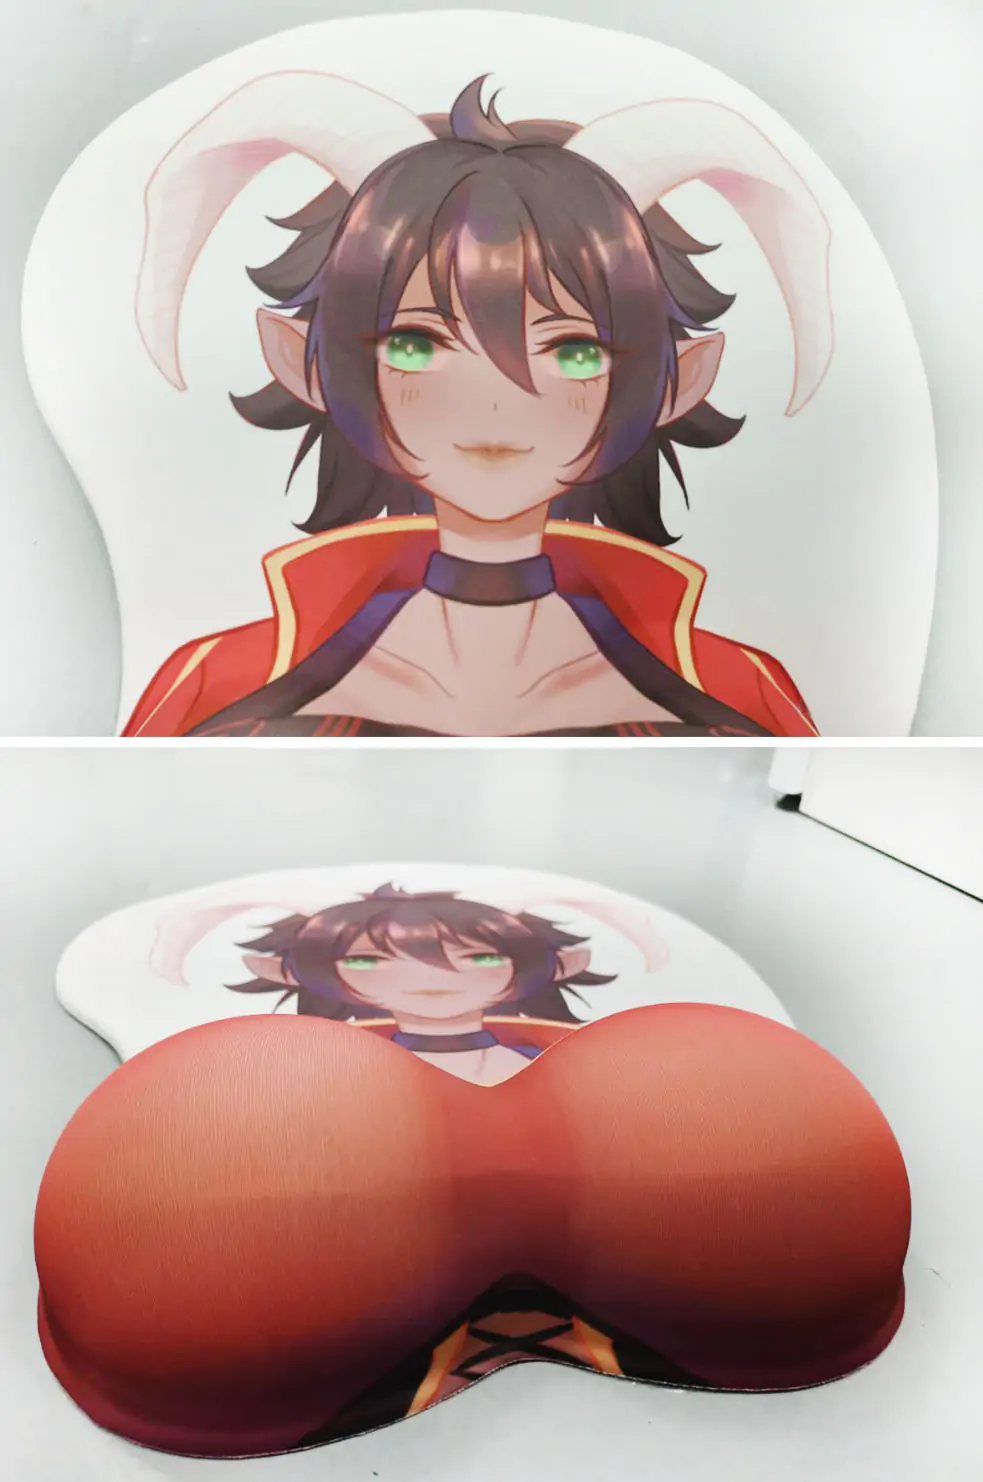 pink double ponytail girl life size oppai mousepad 8844 - Boobie Mouse Pad